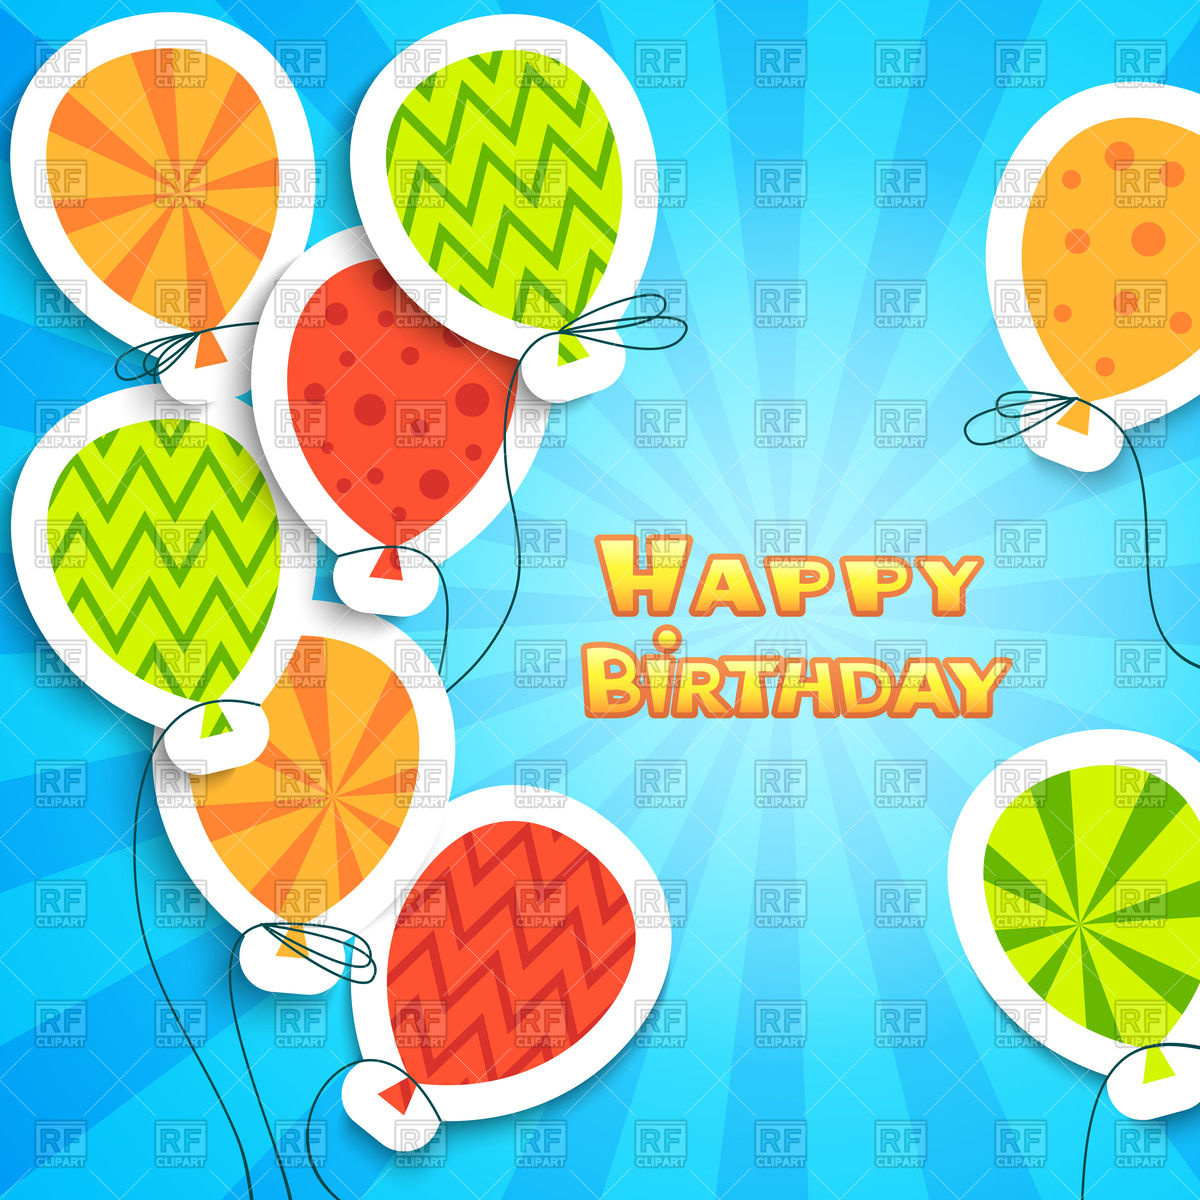 Happy Birthday Applique Background With Balloons Backgrounds